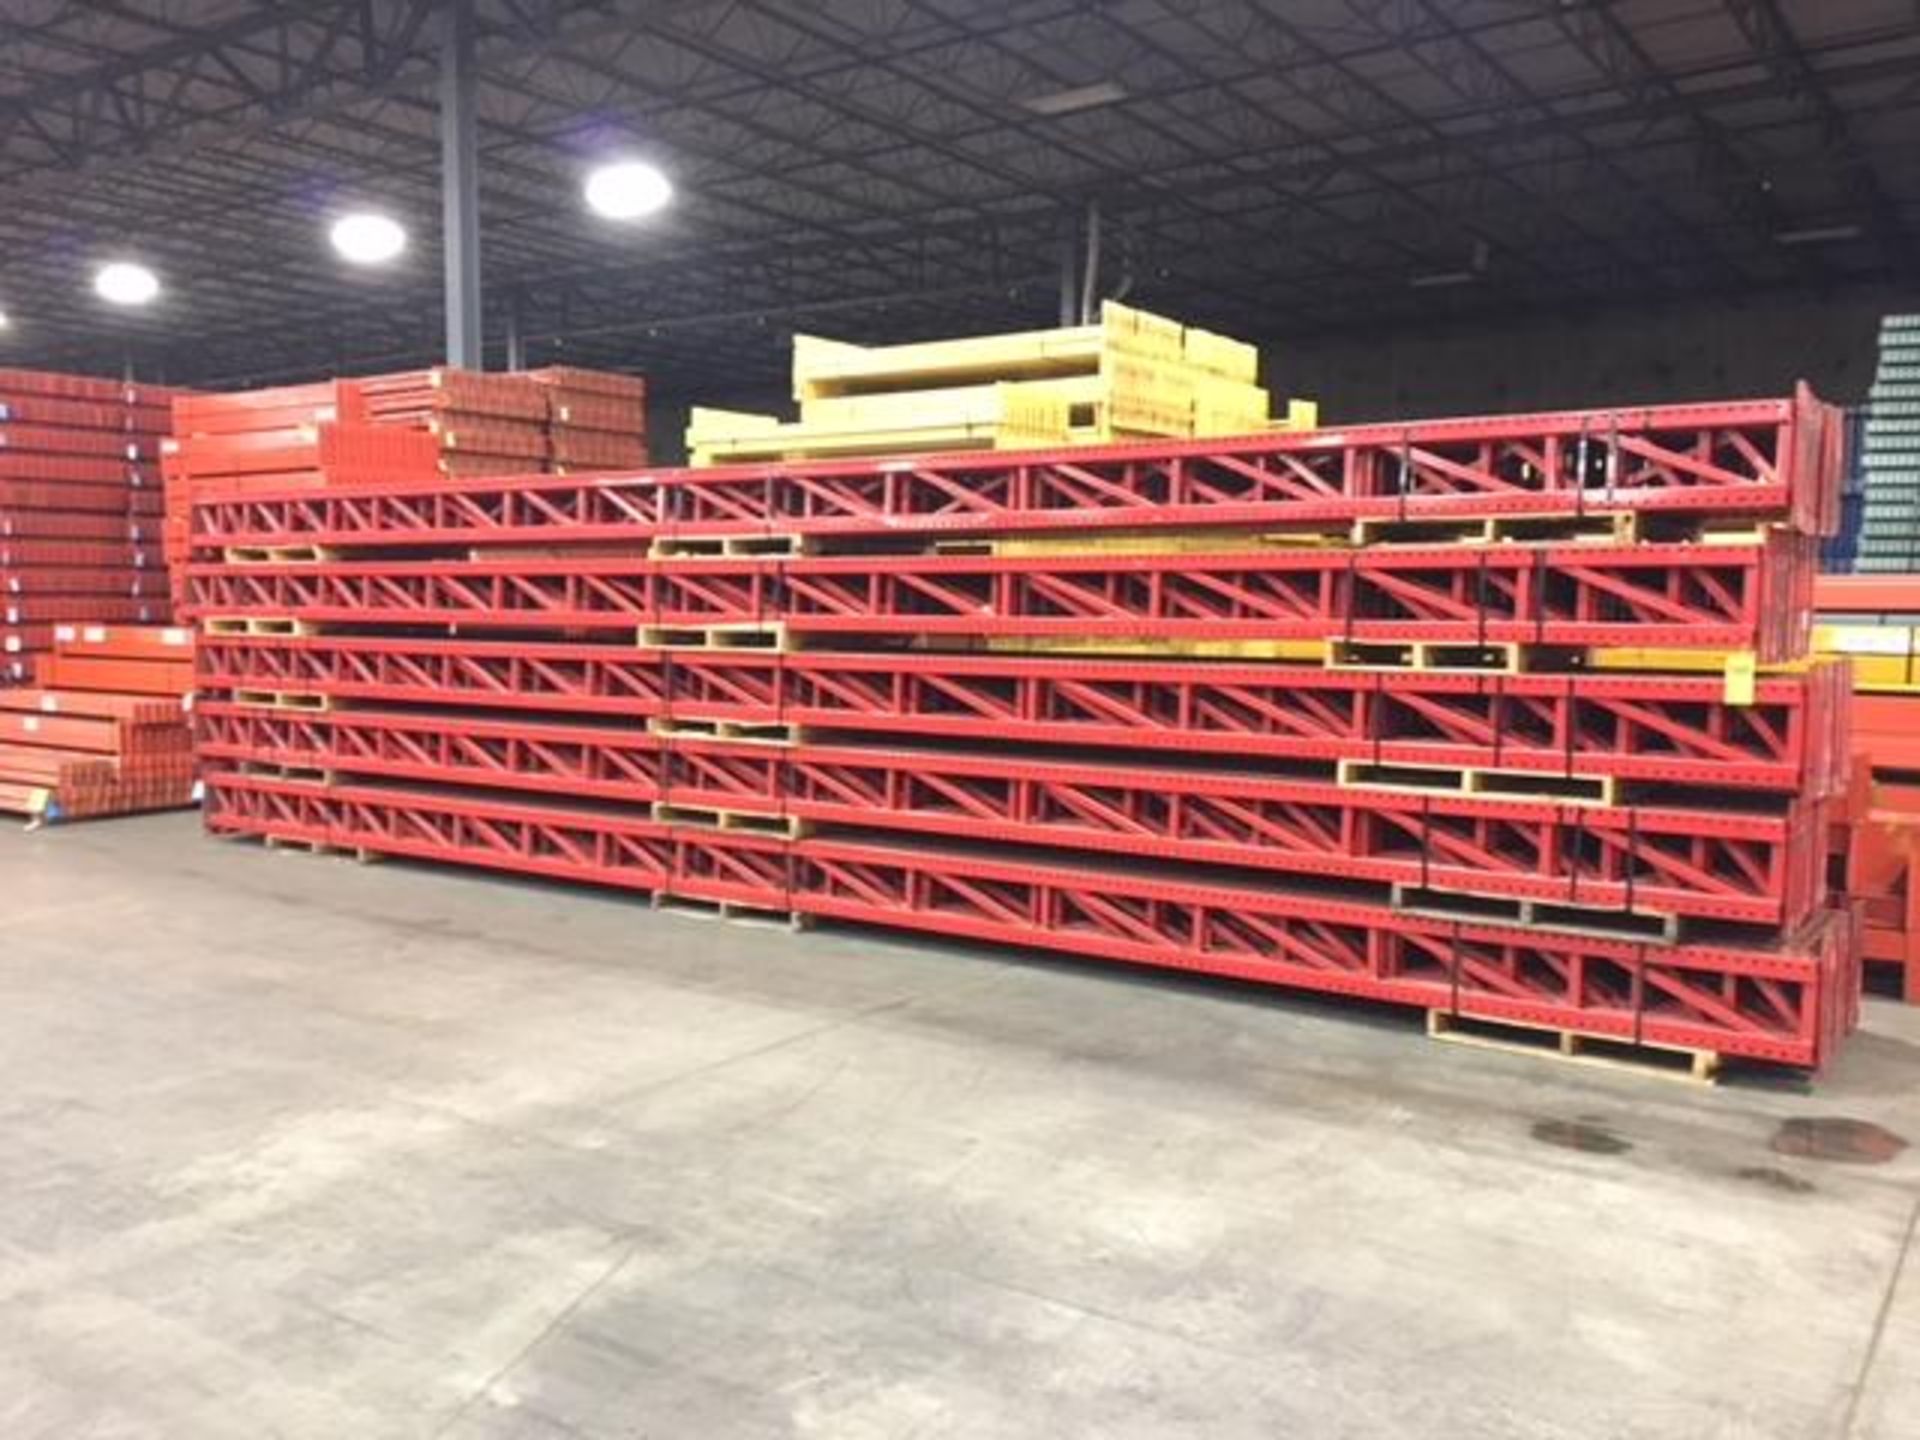 (X75) SECTIONS/BAYS OF KINGWAY TEARDROP STYLE CANTILEVER RACKING, 14" X 384" UPRIGHTS, 48" ARMS - Image 3 of 17